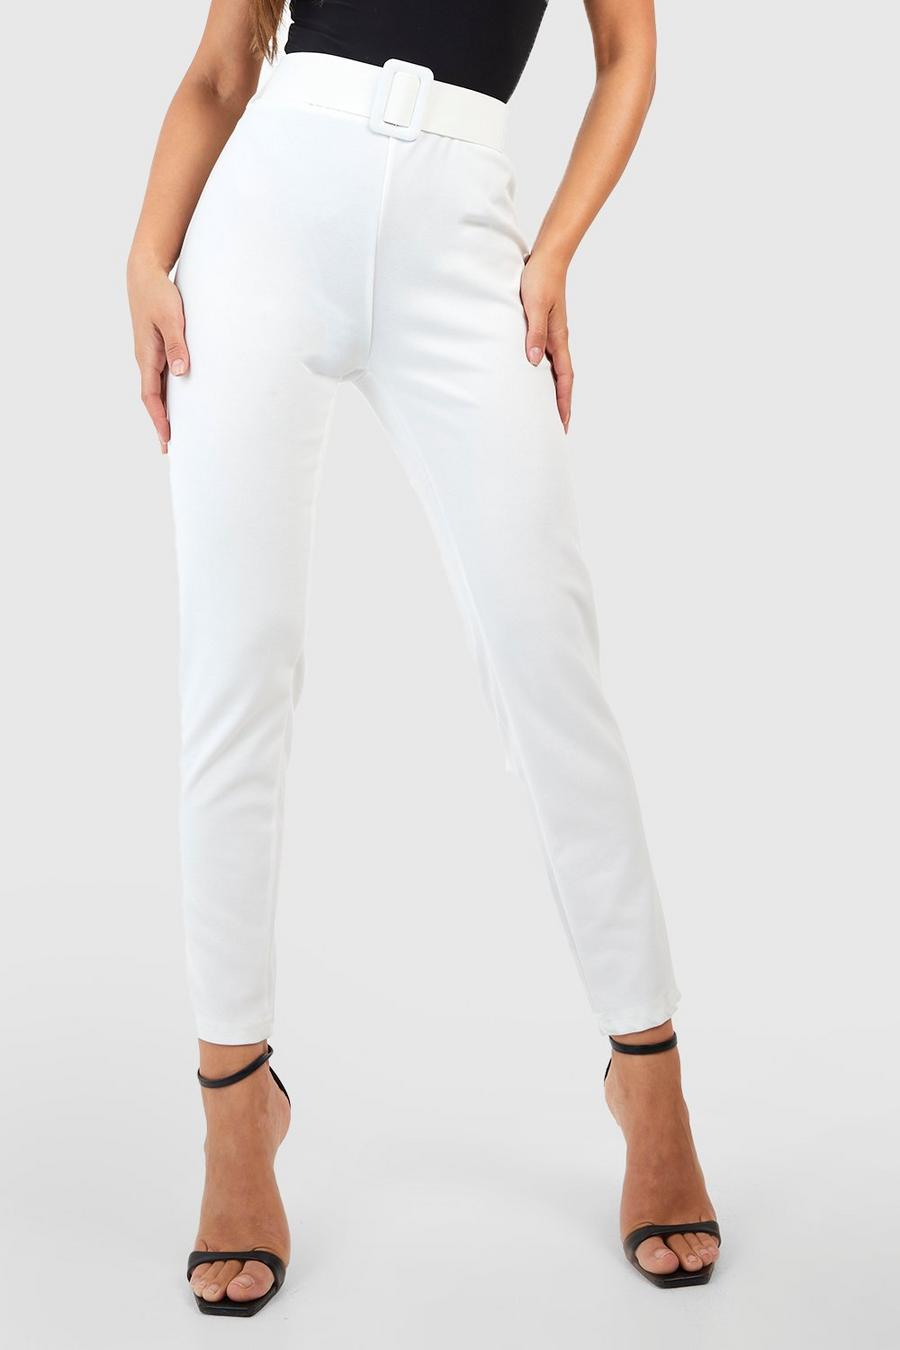 Ivory white High Waisted Buckle Belted Cigarette Pants